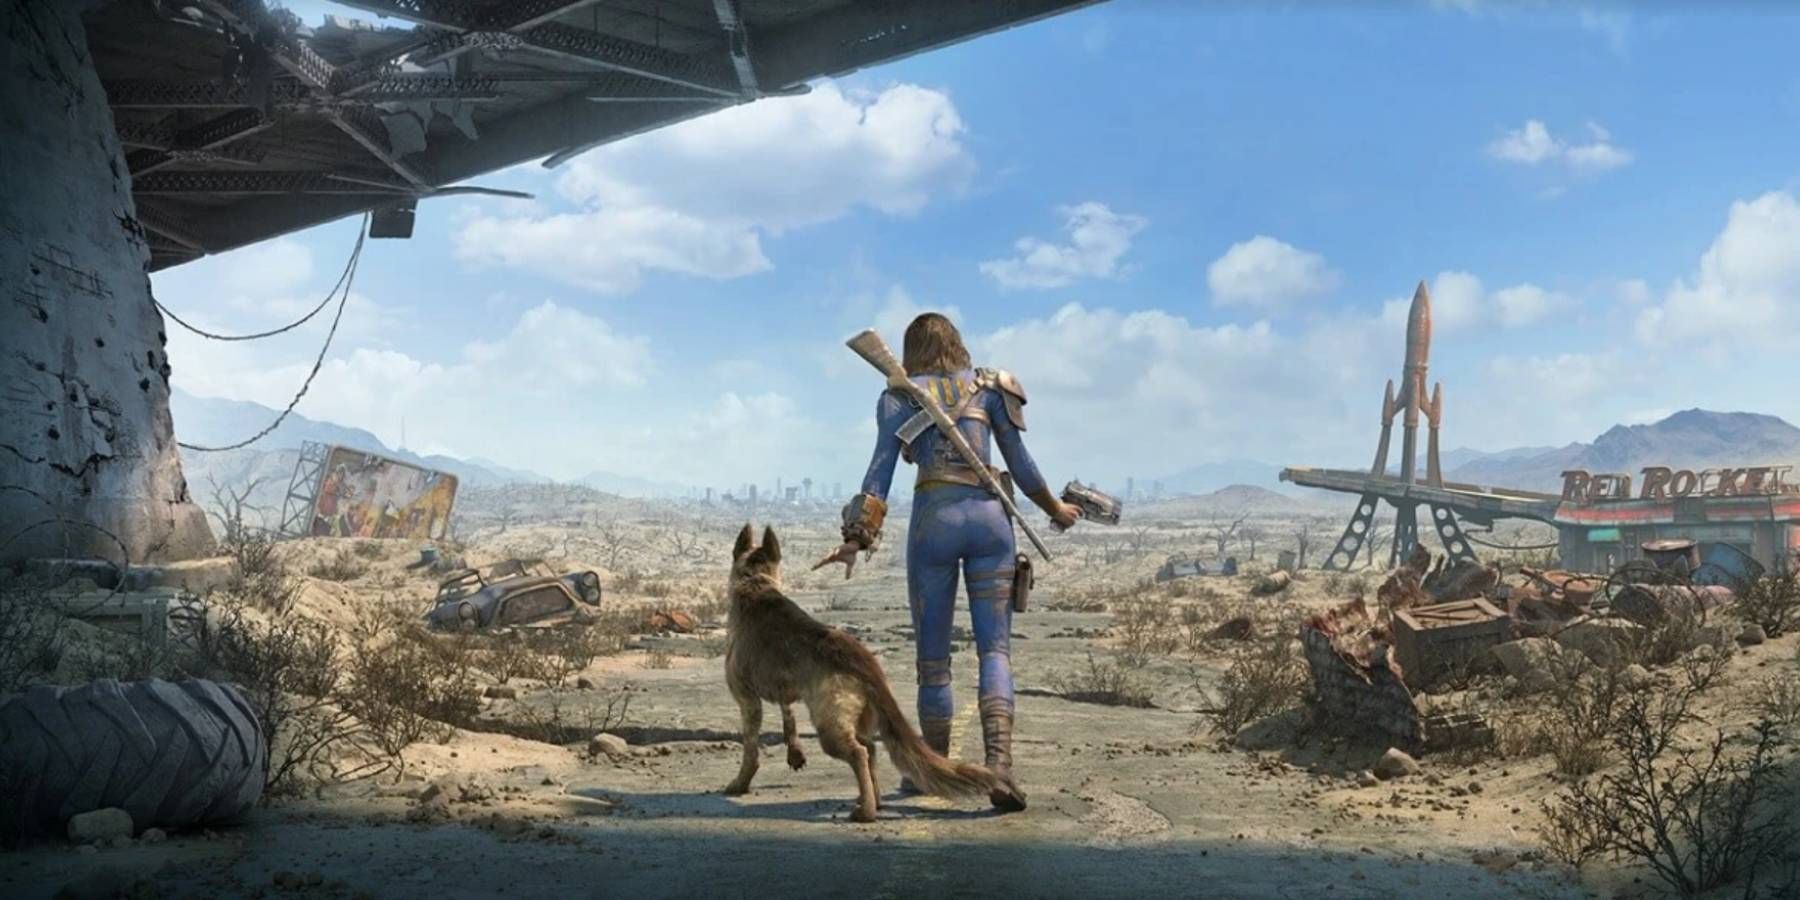 Promotional art of the Sole Survivor and Dogmeat from Fallout 4